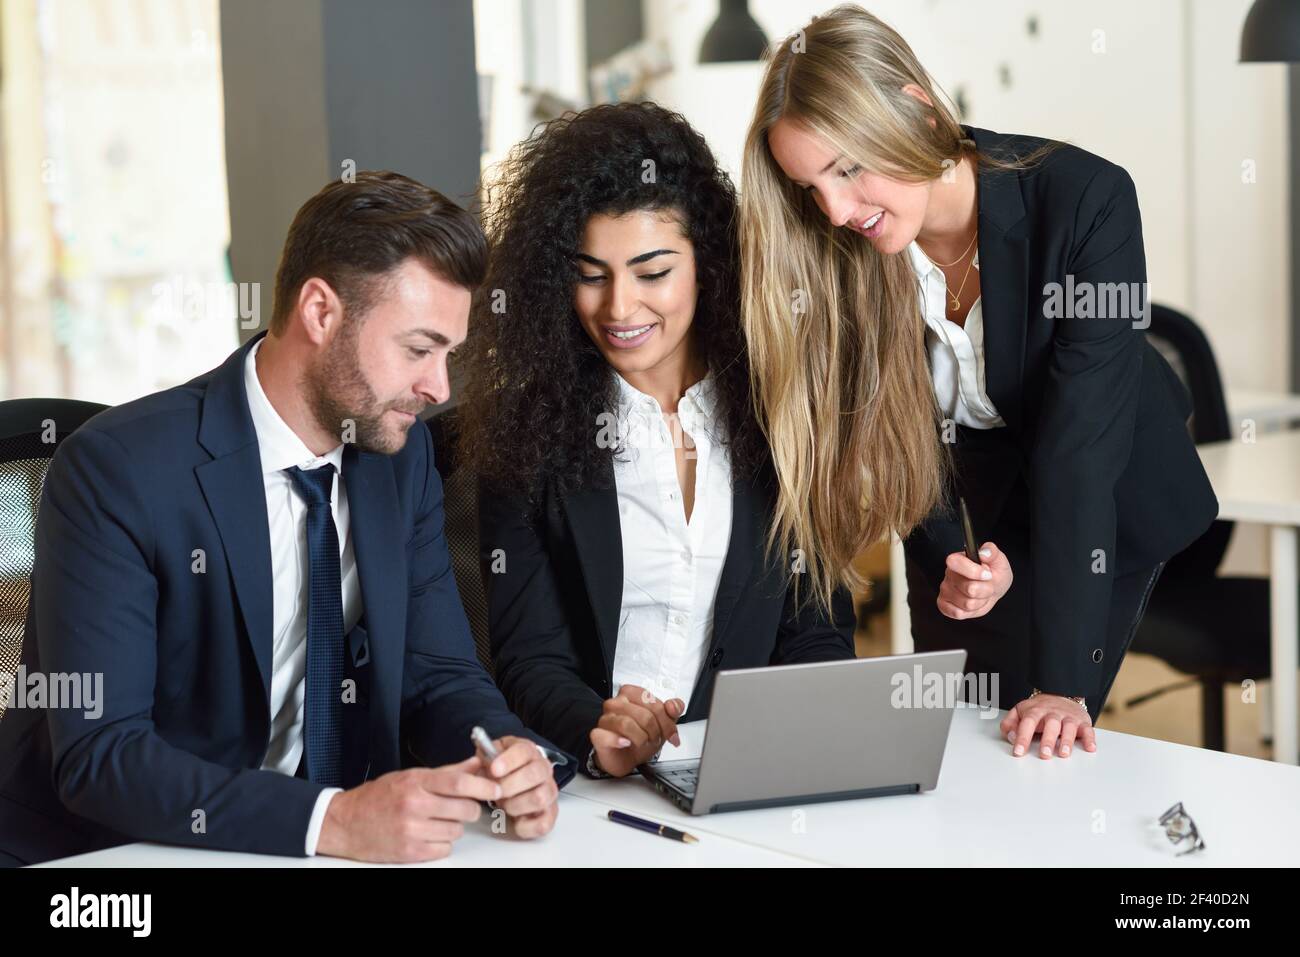 Multi-ethnic group of three businesspeople meeting in a modern office. Two women and a man wearing suit looking at a laptop computer. Stock Photo